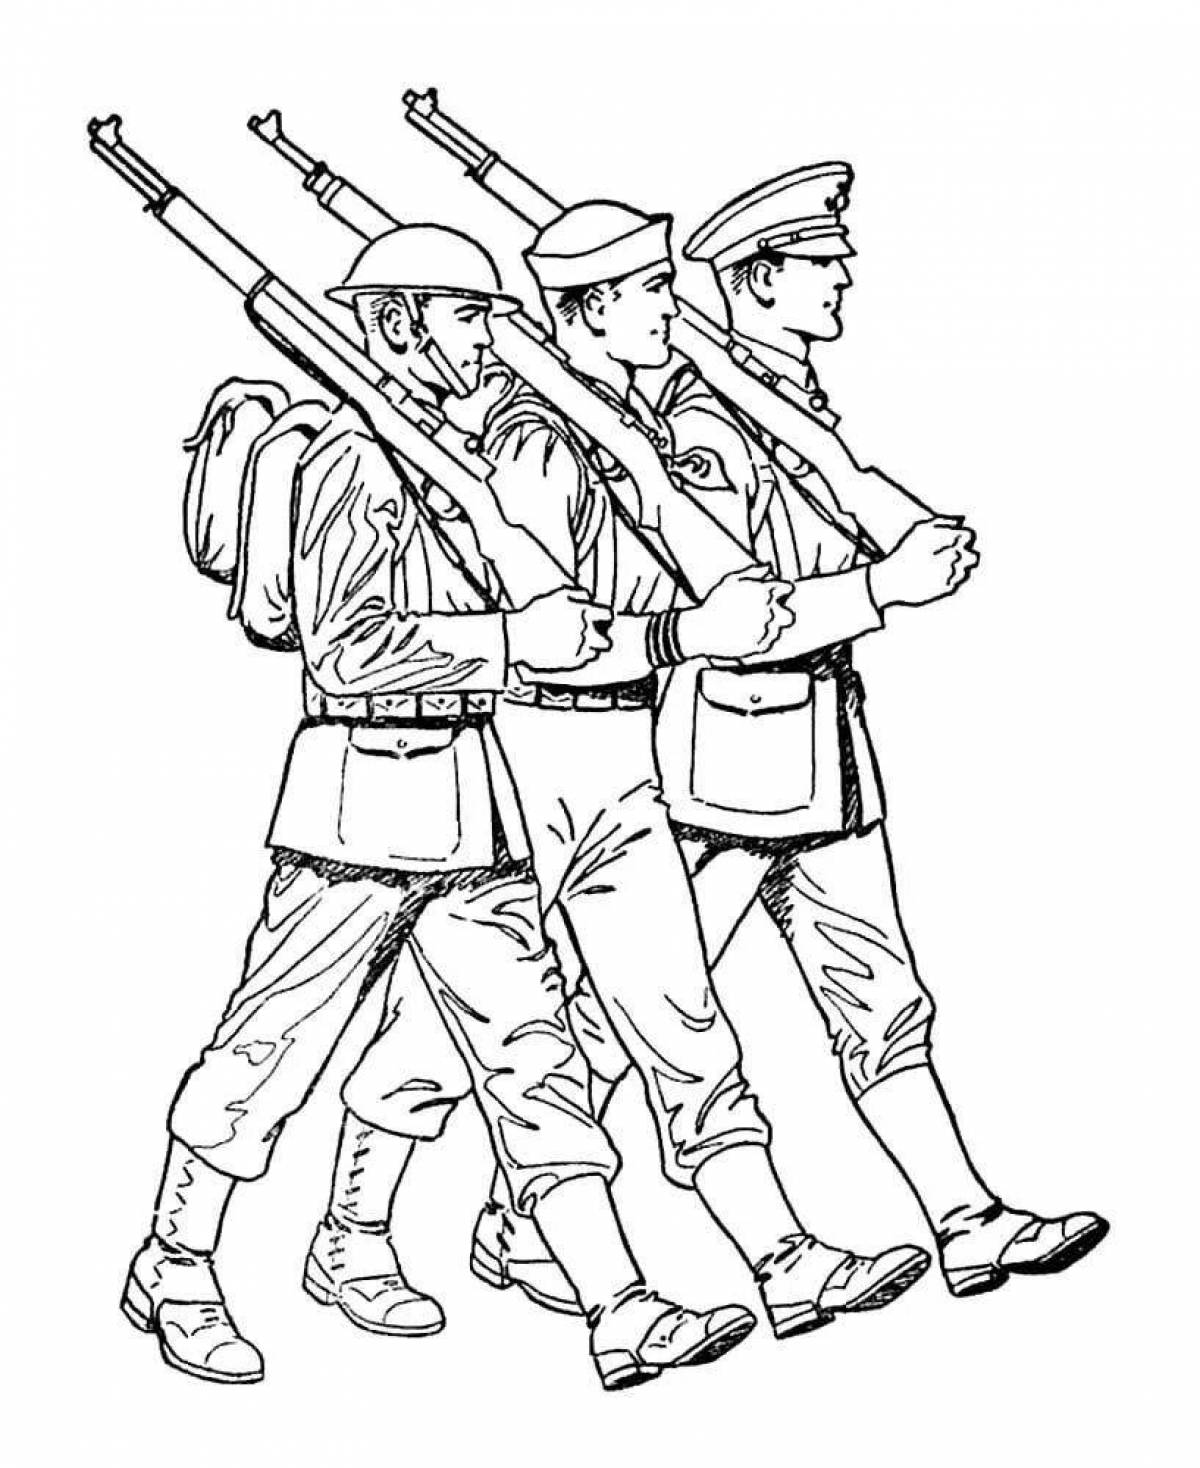 Bright military coloring pages for boys